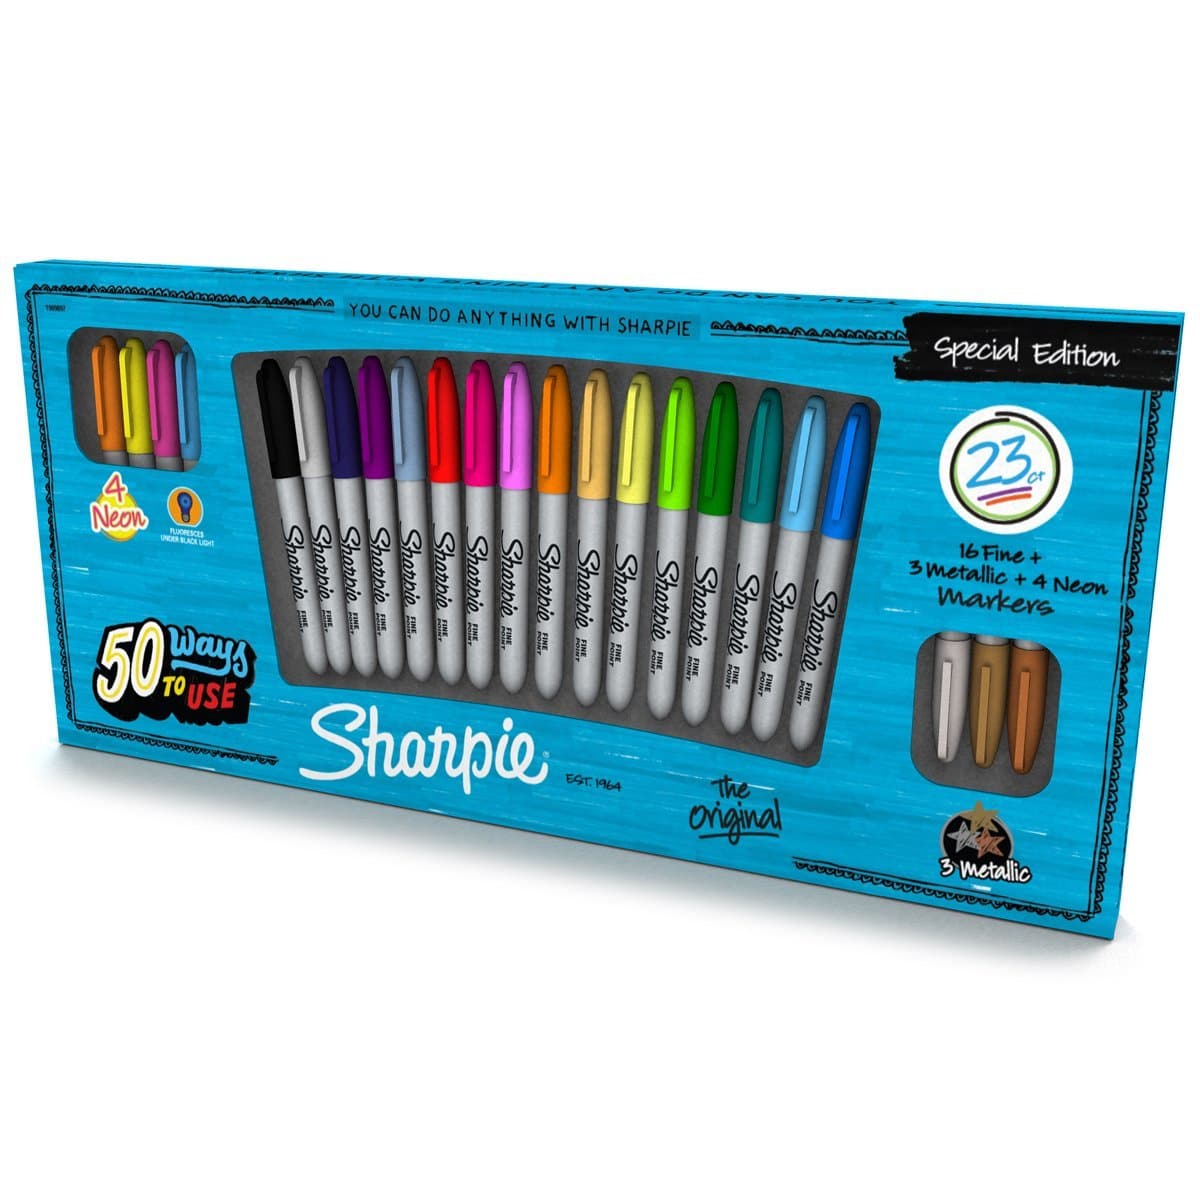 DEAL ALERT: Up to 77% off art supplies from Sharpie and Prismacolor